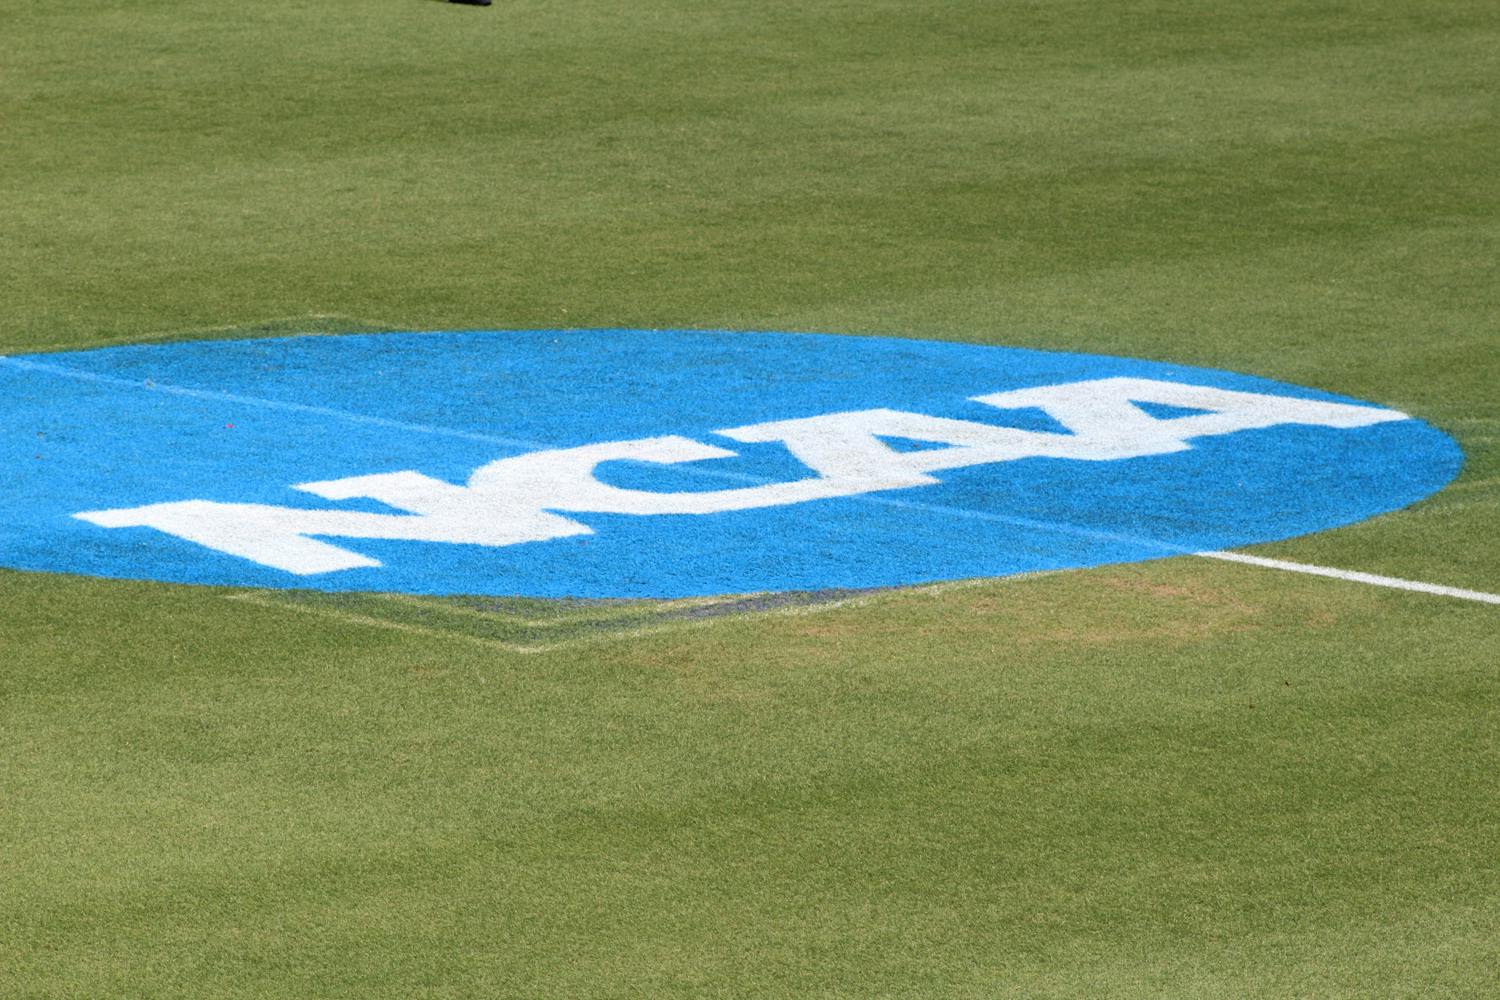 The NCAA announced June 30 increased NIL freedoms for the entire country starting July 1.